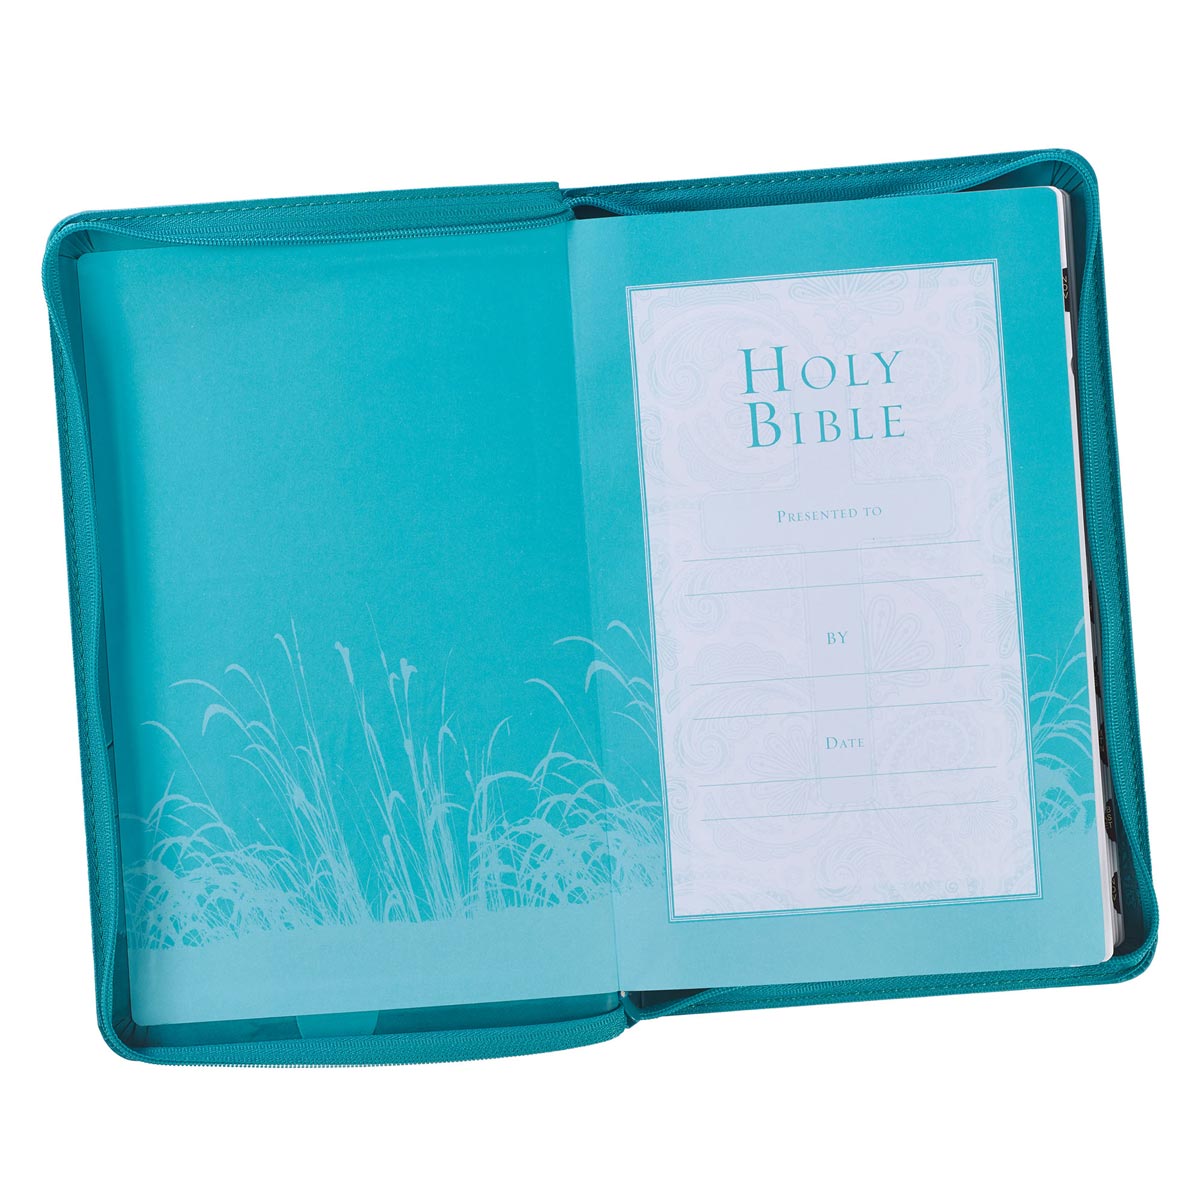 Turquoise Faux Leather King James Version Deluxe Gift Bible with Thumb Index and Zippered Closure - The Christian Gift Company